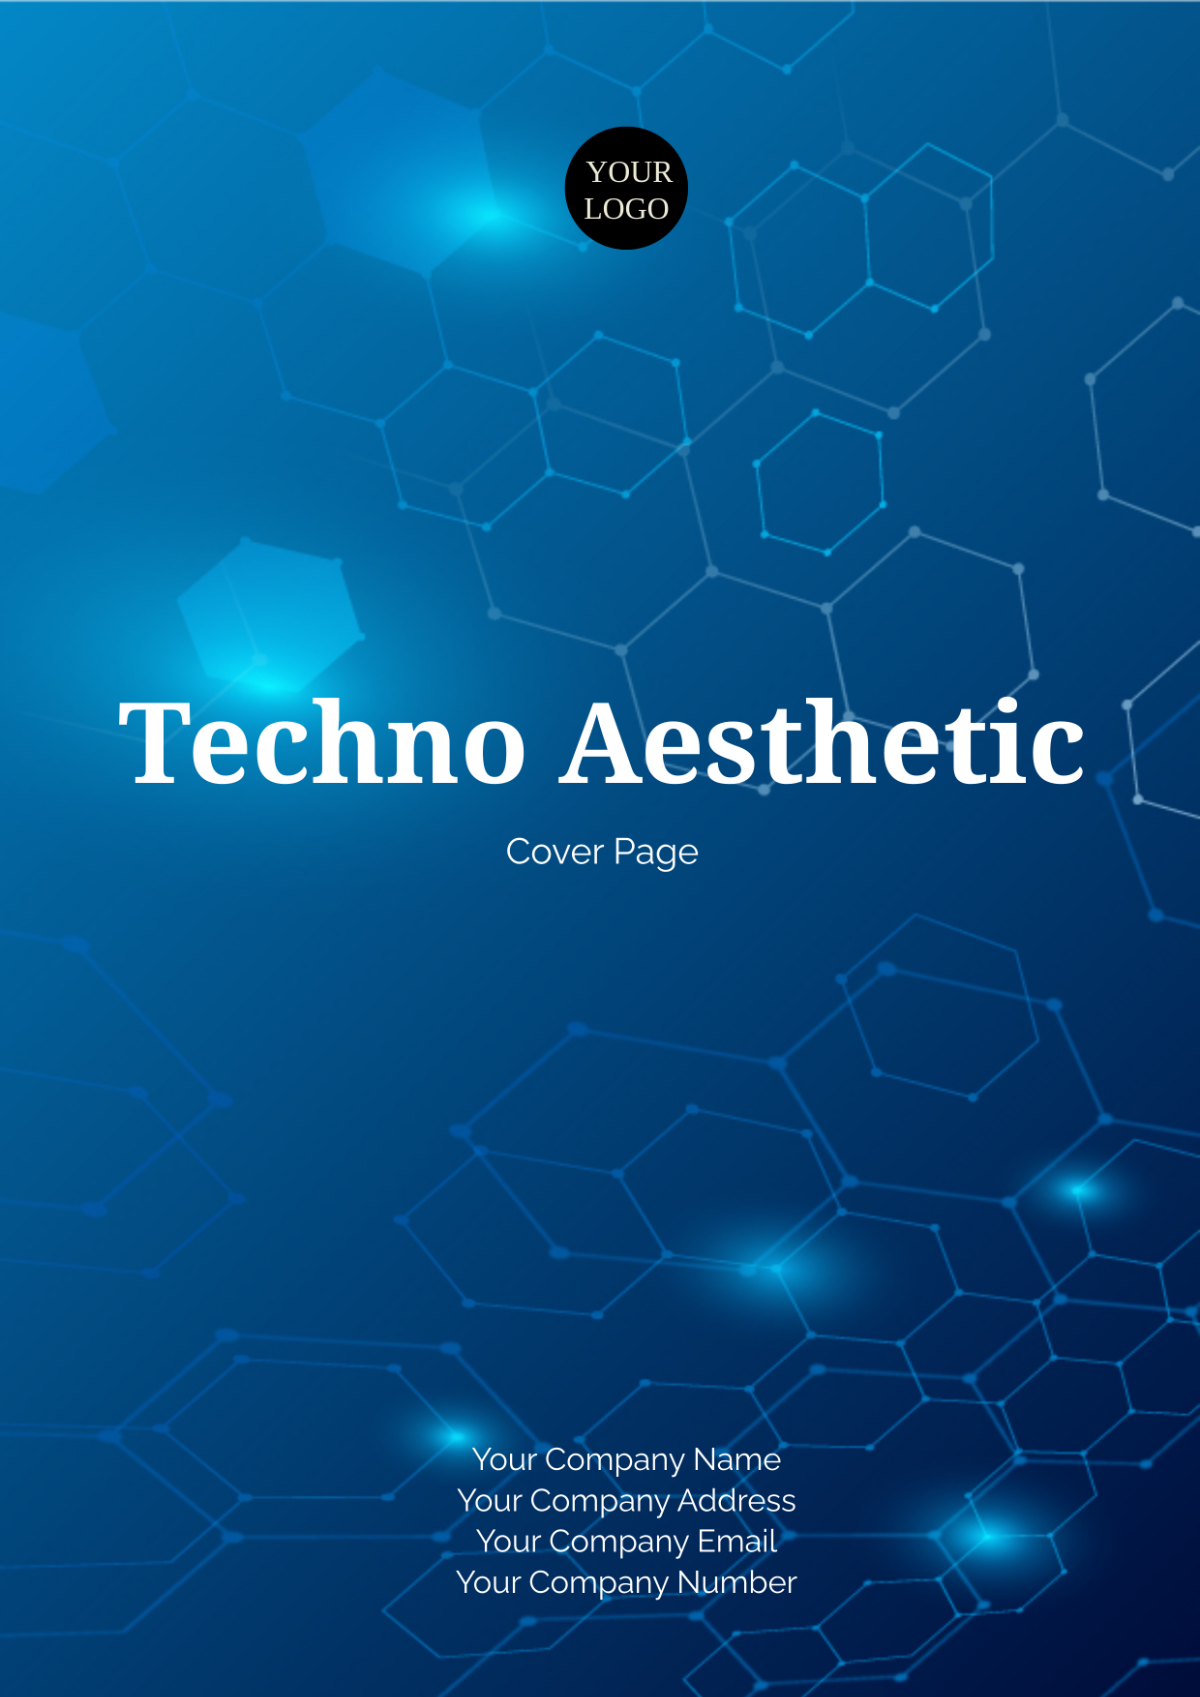 Techno Aesthetic Cover Page